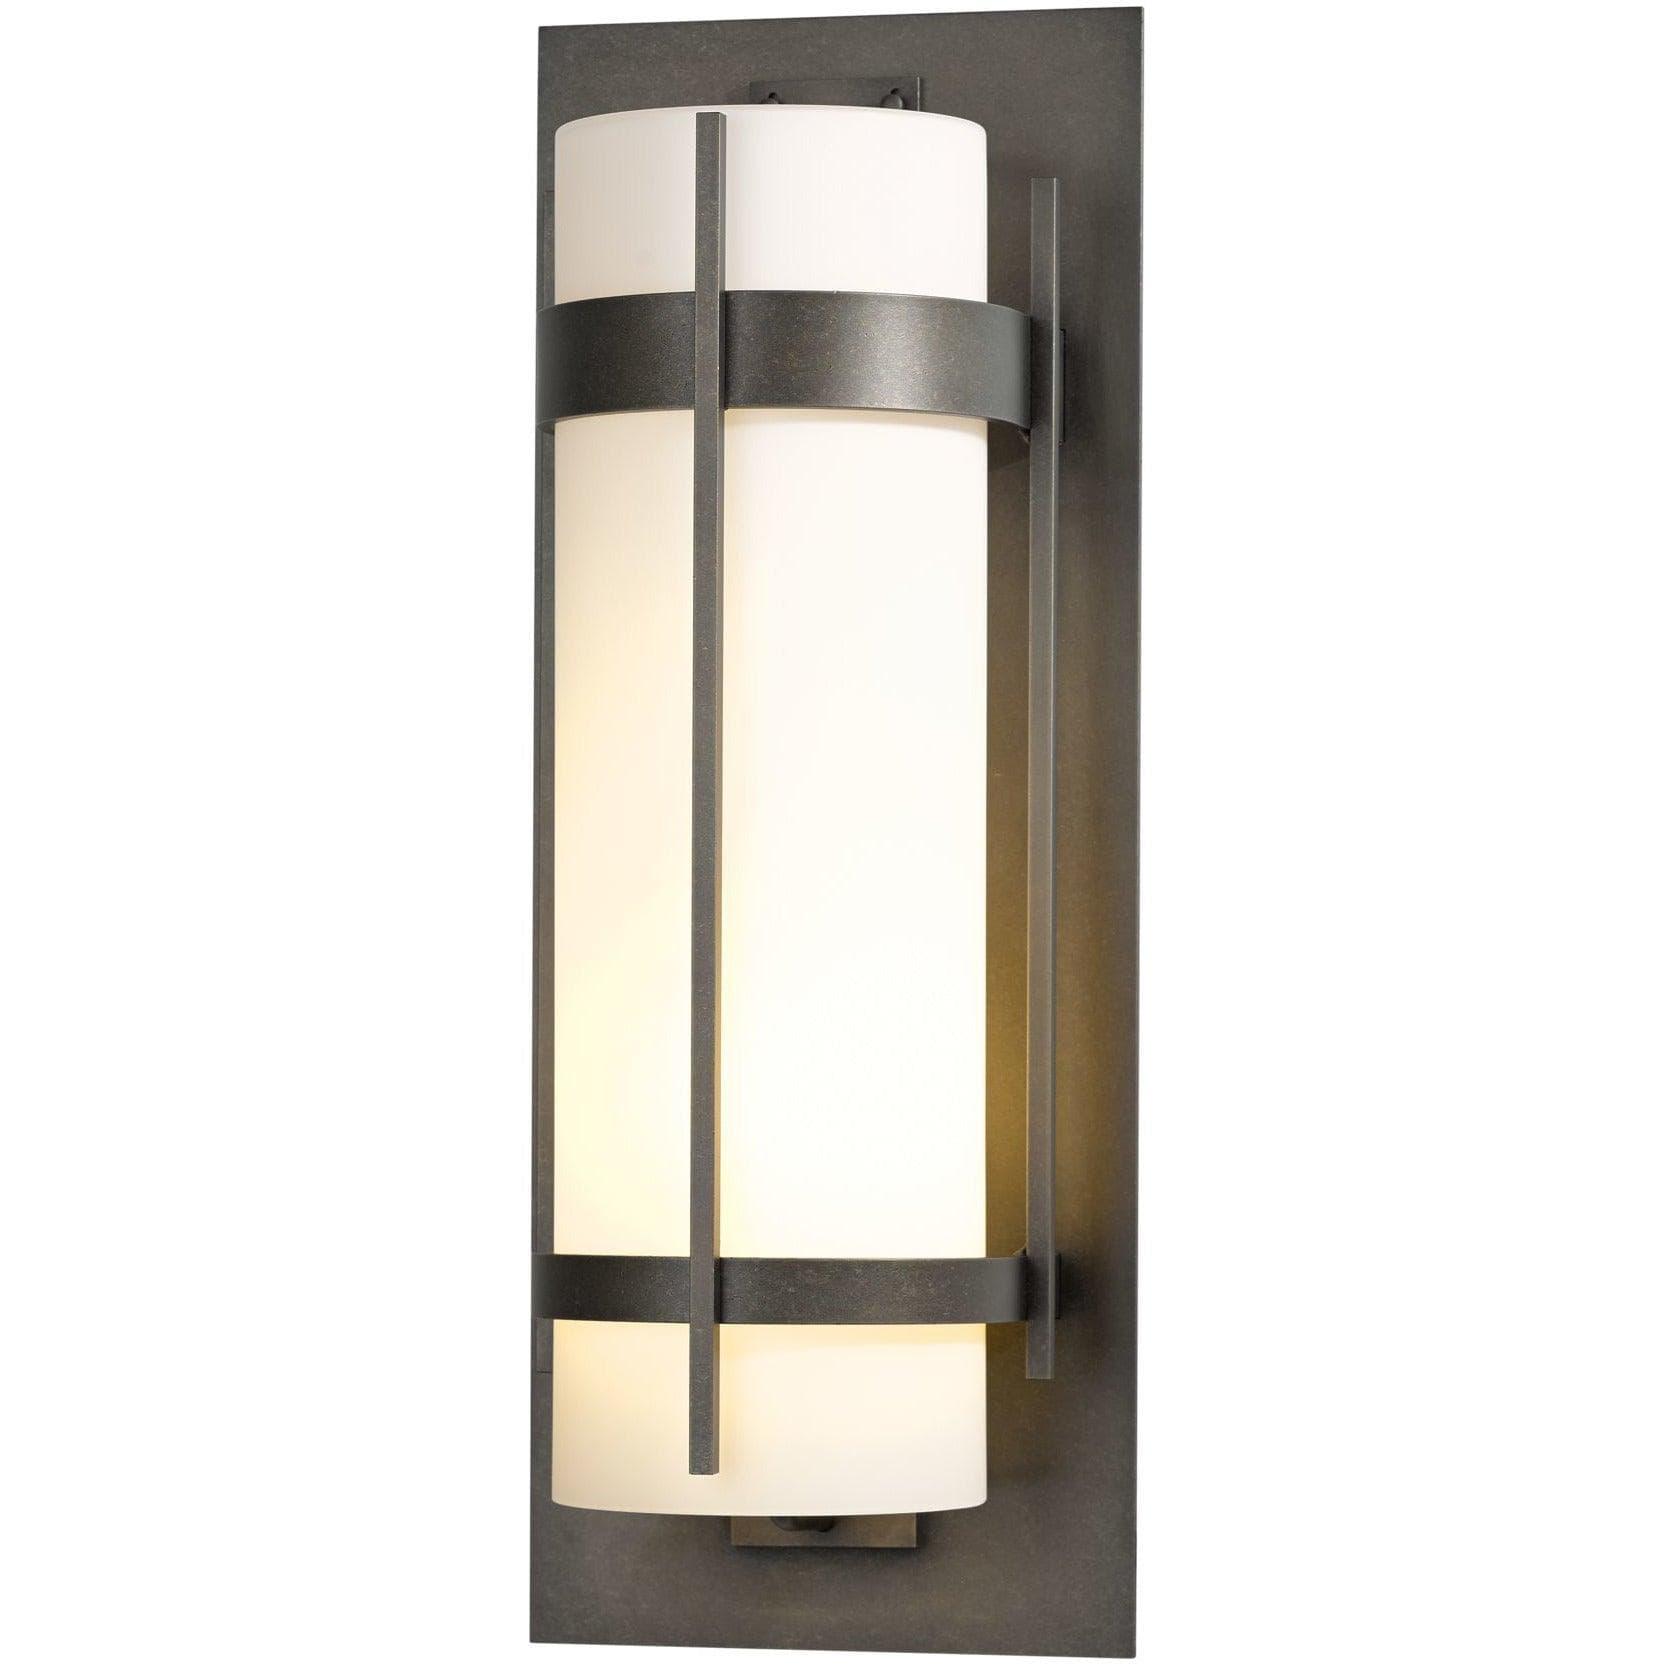 Hubbardton Forge - Banded 25-Inch One Light Outdoor Wall Sconce - 305895-SKT-77-GG0240 | Montreal Lighting & Hardware